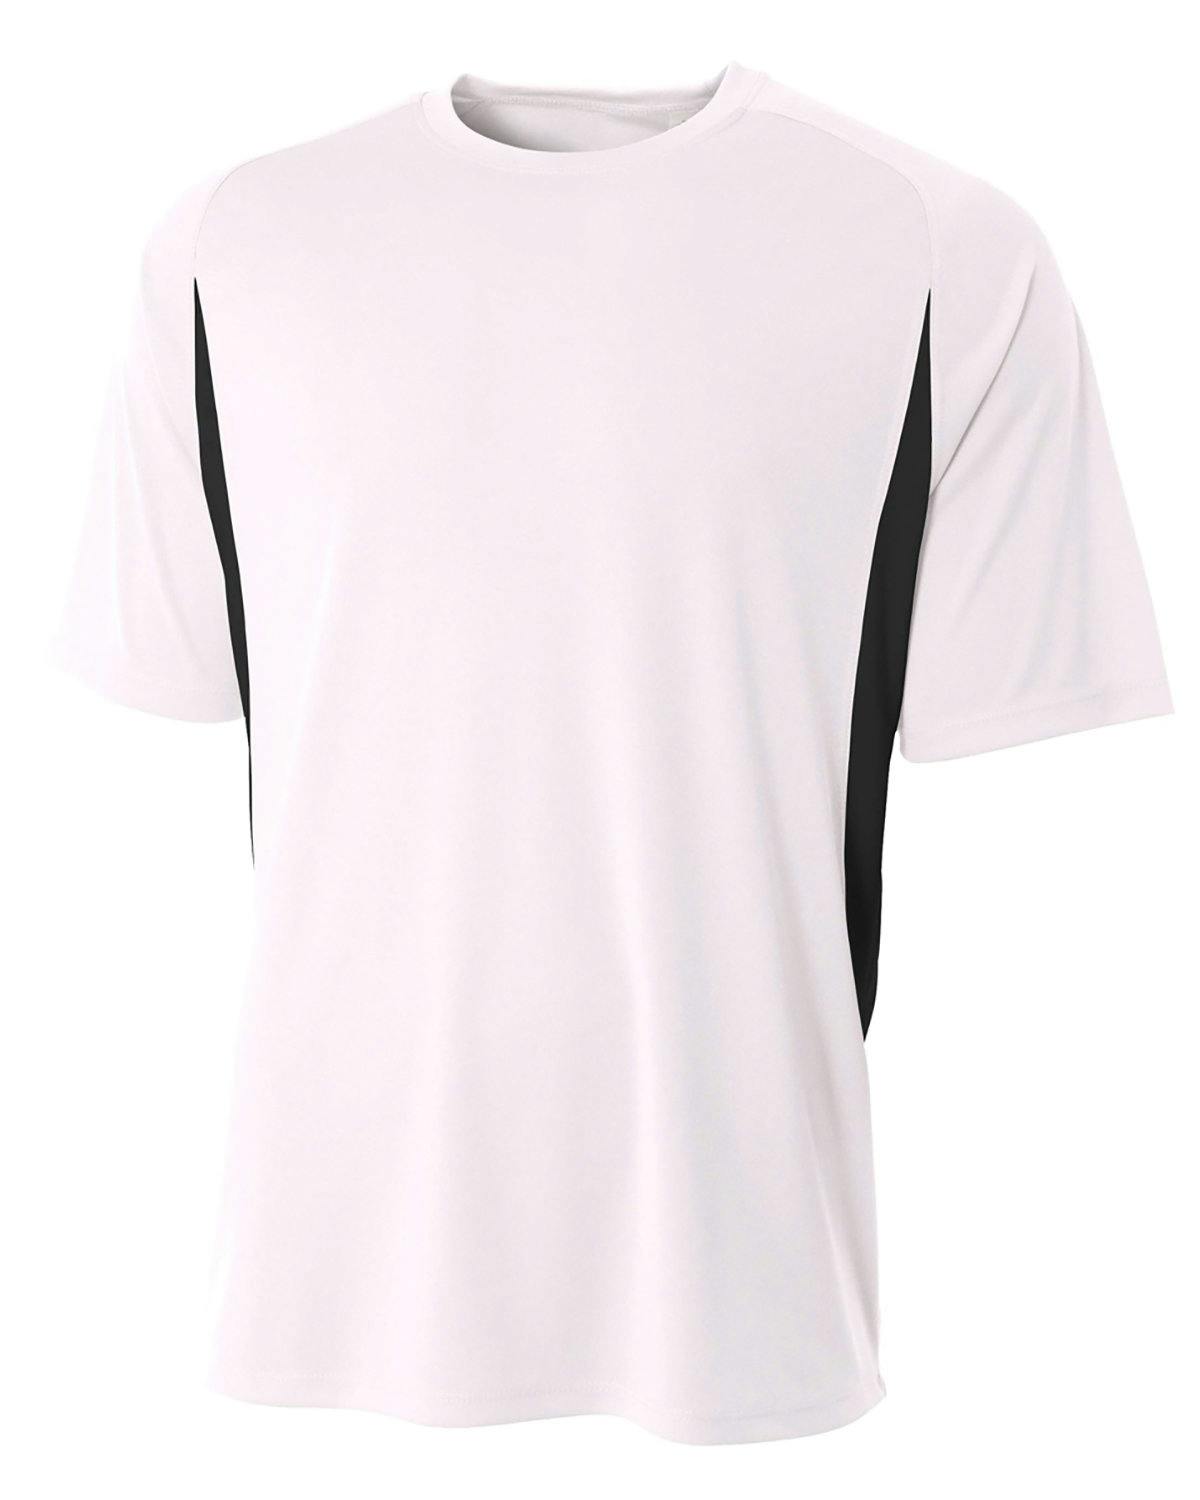 Image for Men's Cooling Performance Color Blocked T-Shirt